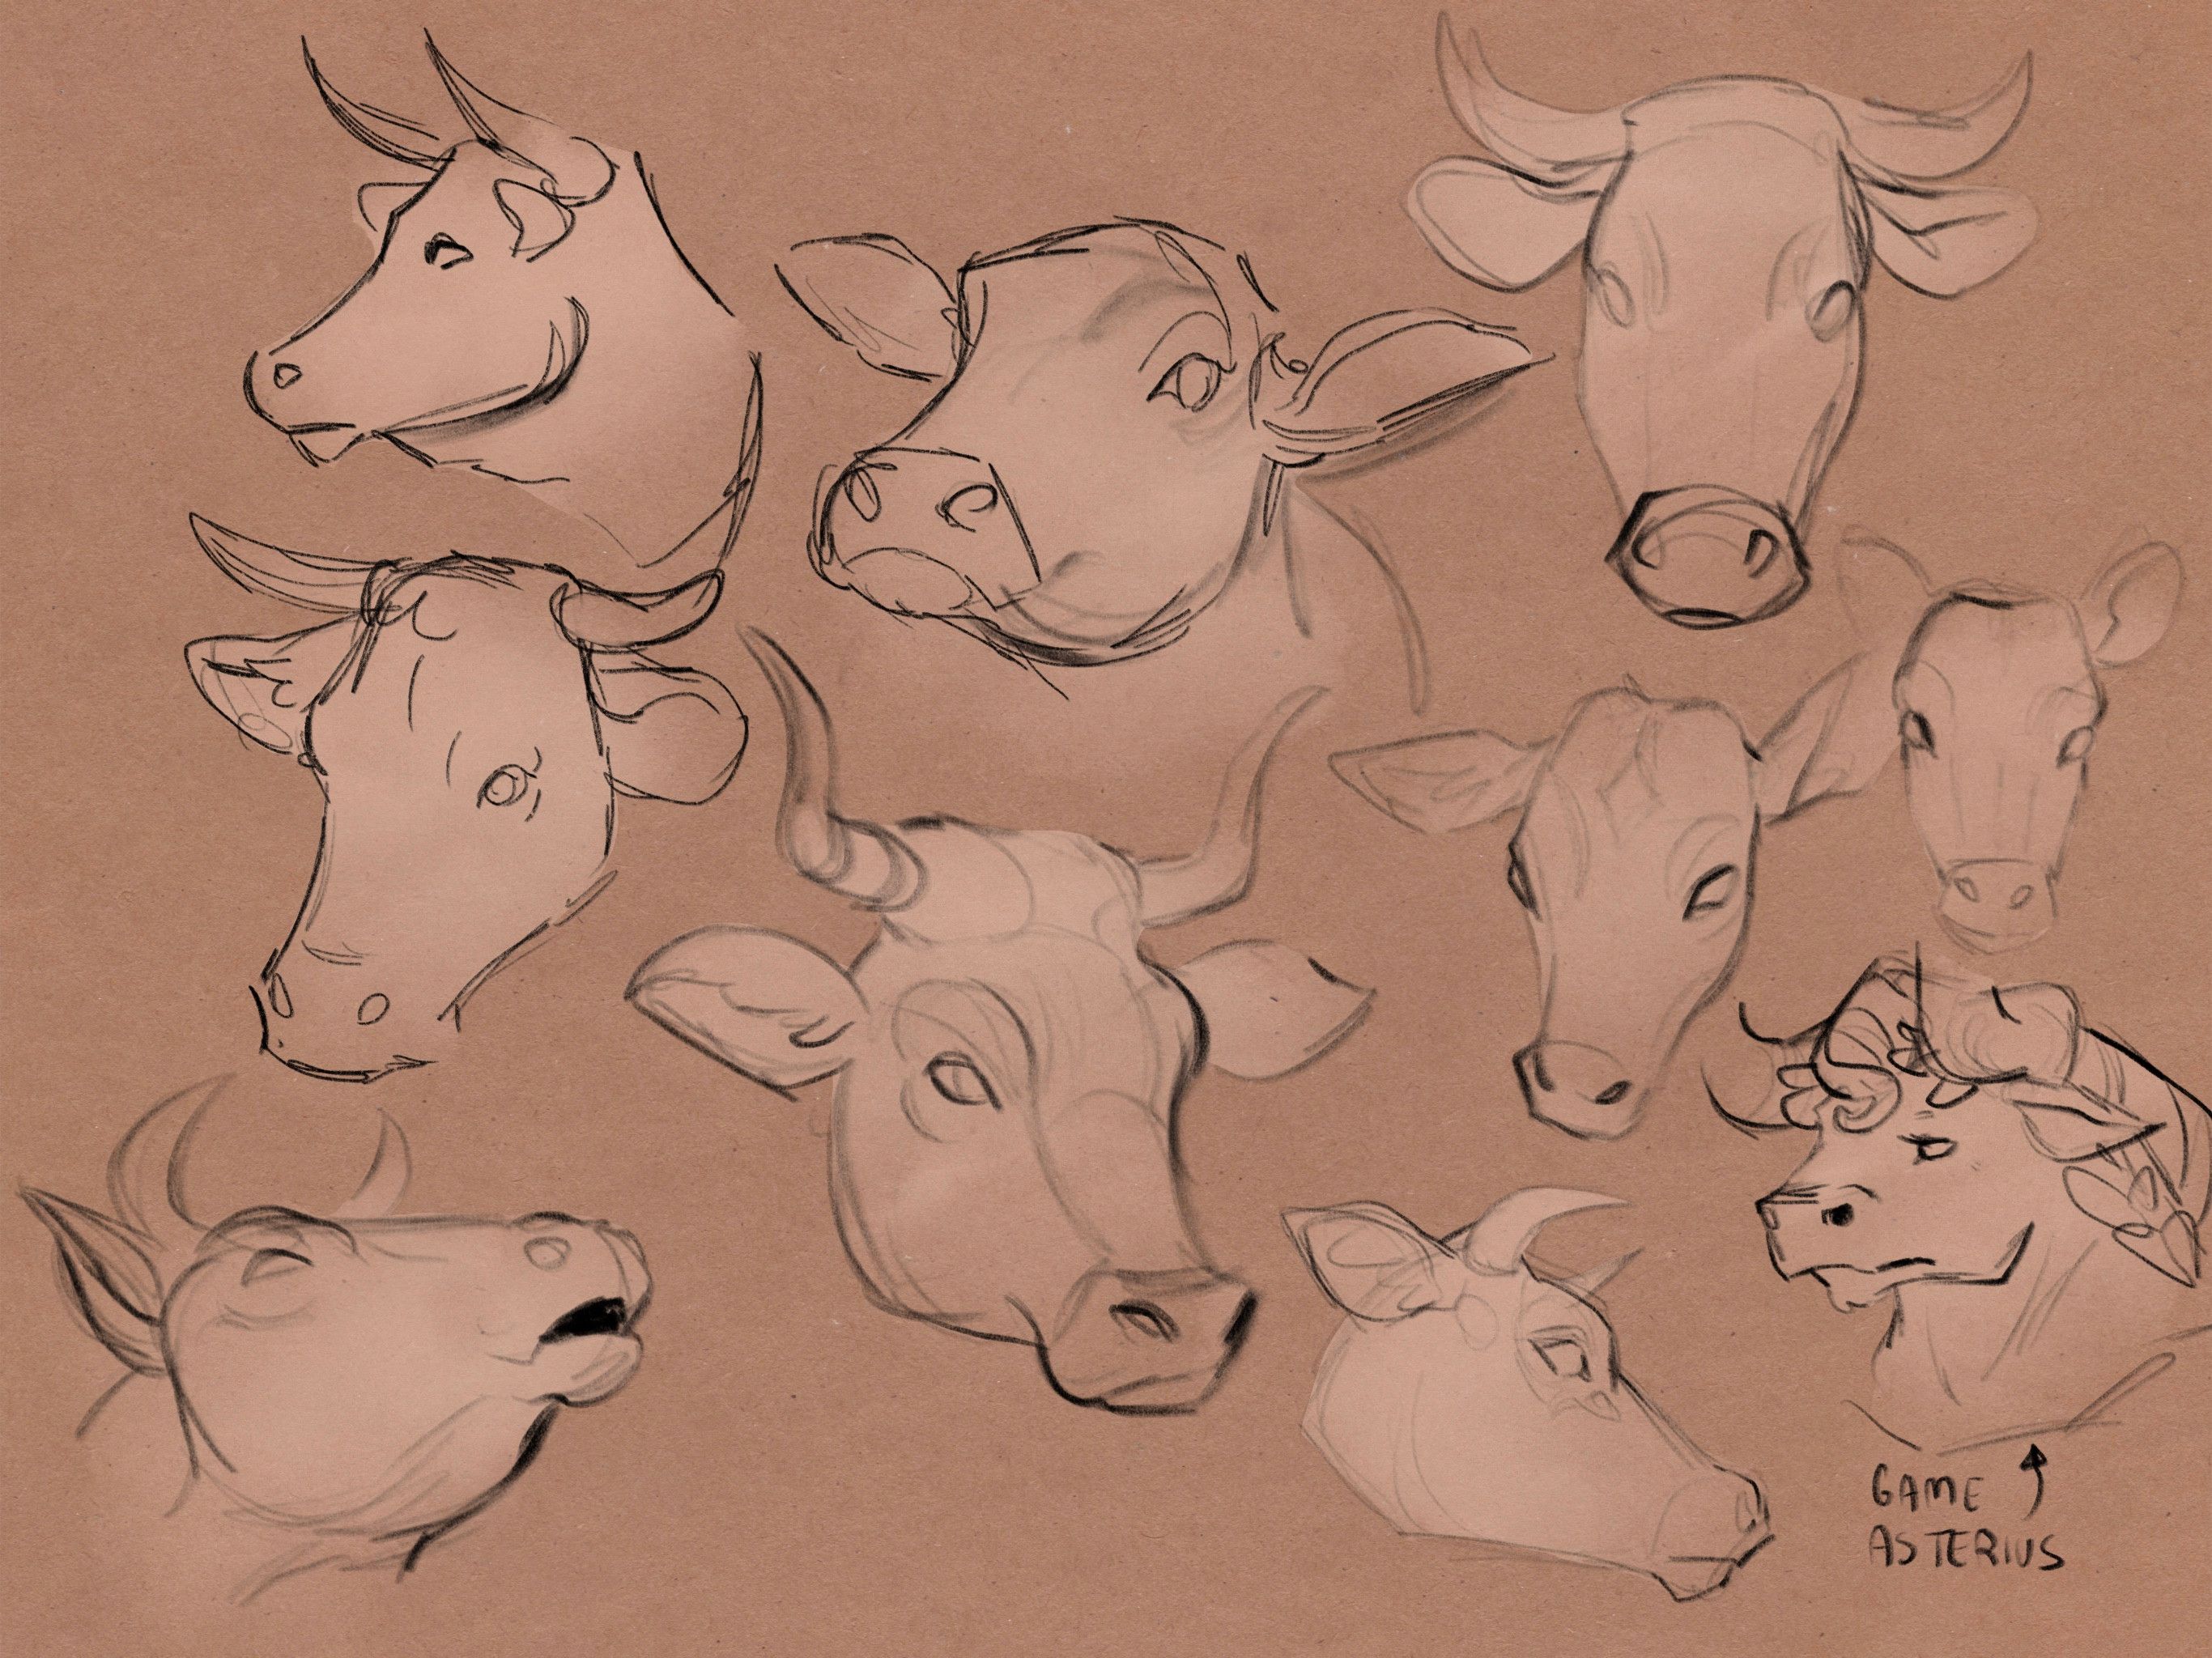 Getting used to the shapes and angles of cow/bull faces since I’ve never drawn them before.